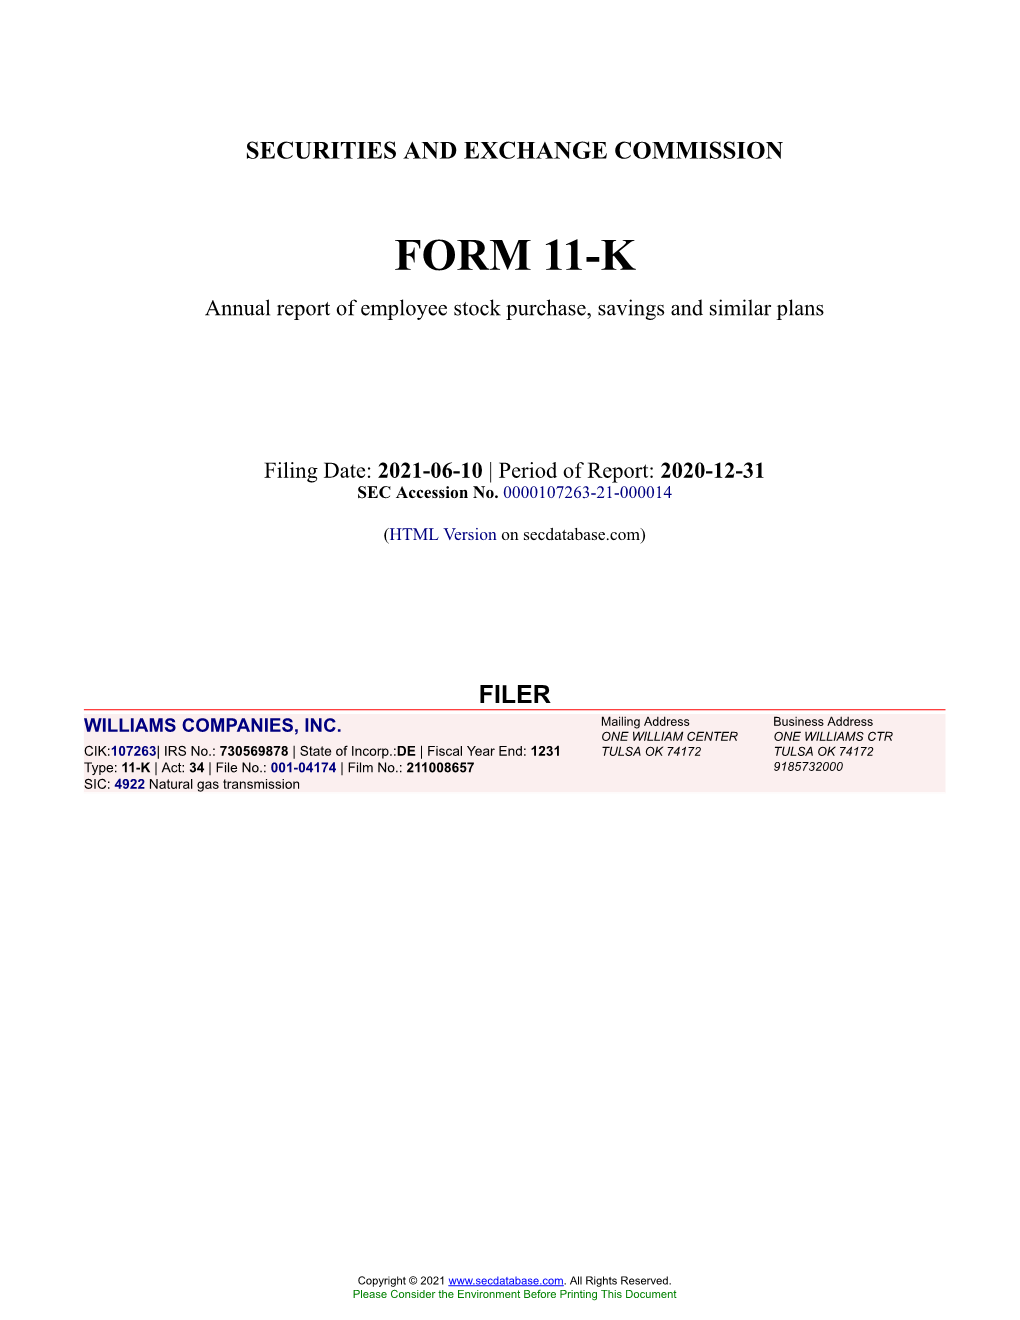 WILLIAMS COMPANIES, INC. Form 11-K Annual Report Filed 2021-06-10